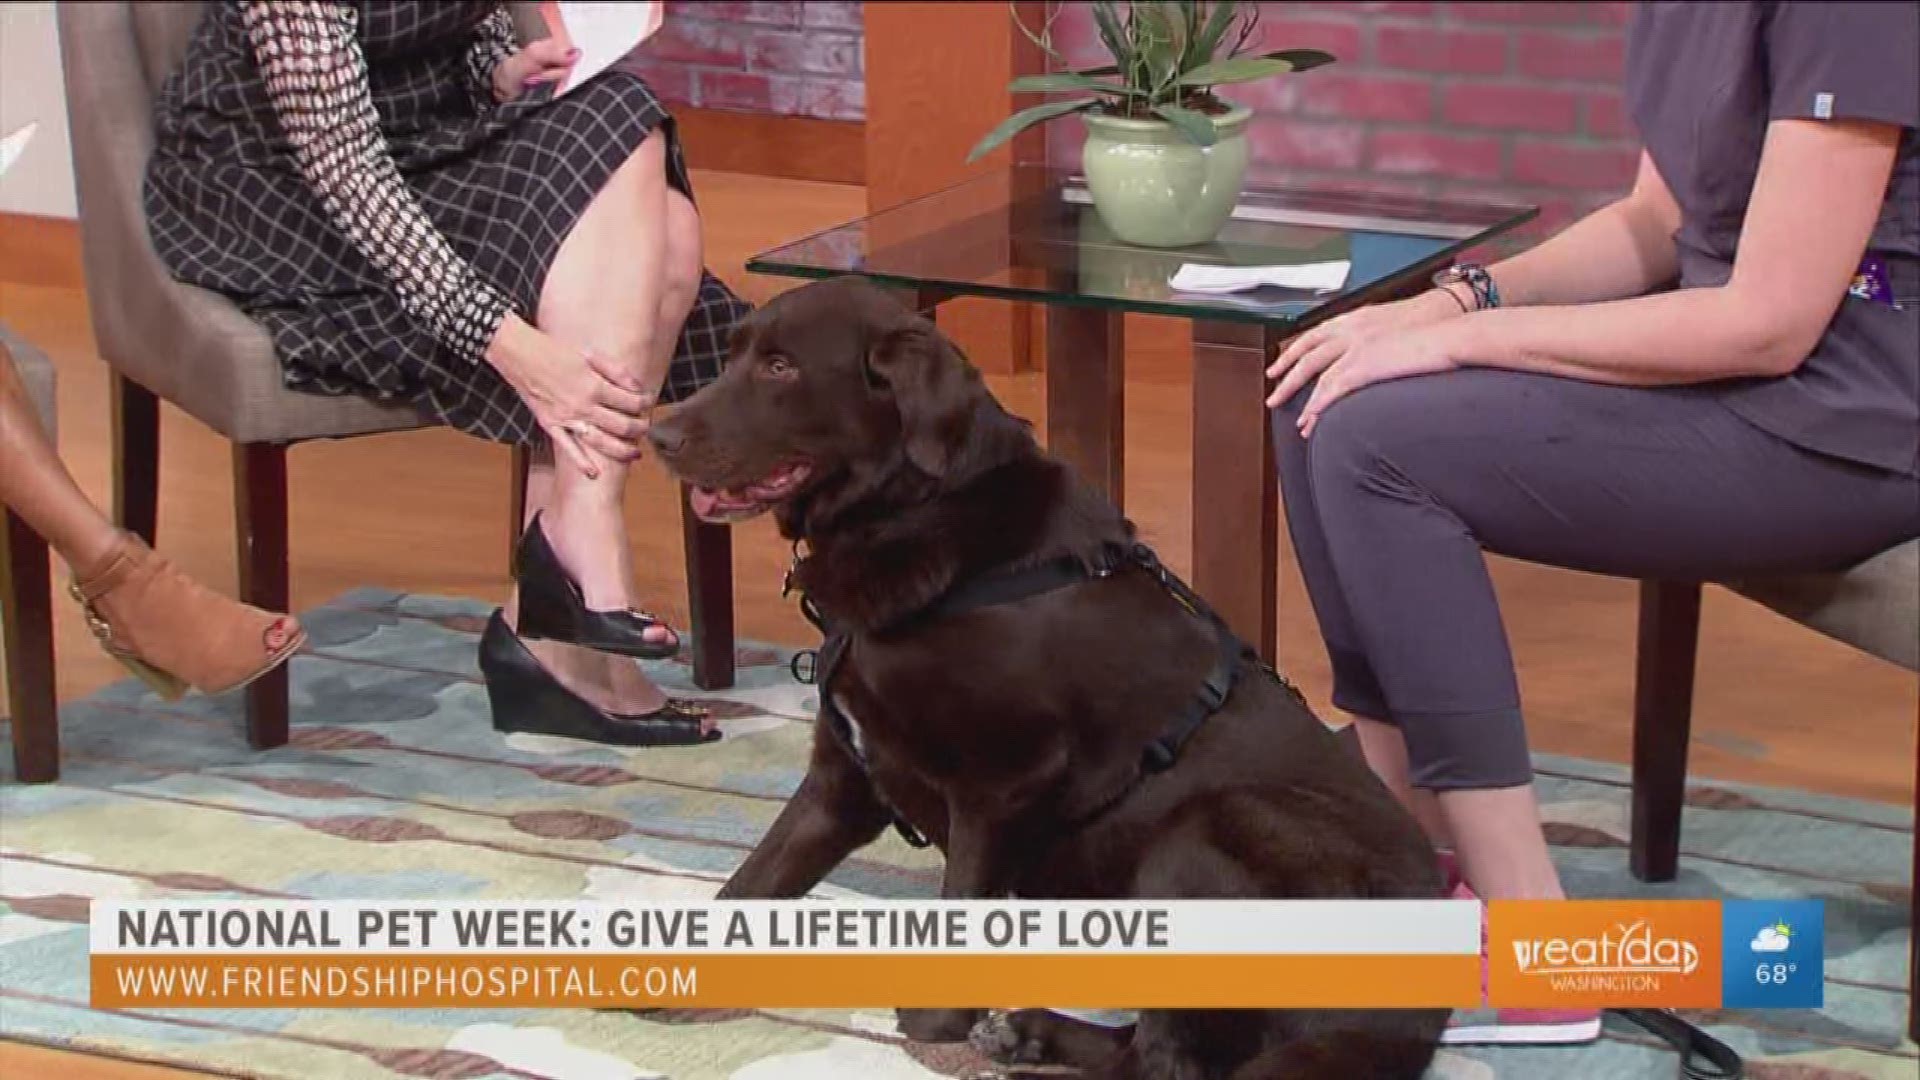 It's National Pet Week and this year's theme is "give them a lifetime of love".  Learn how to best care and love for your pet from Dr. Christine Klippen from Friendship Hospital for Animals. For more information go to www.FriendshipHospital.com.